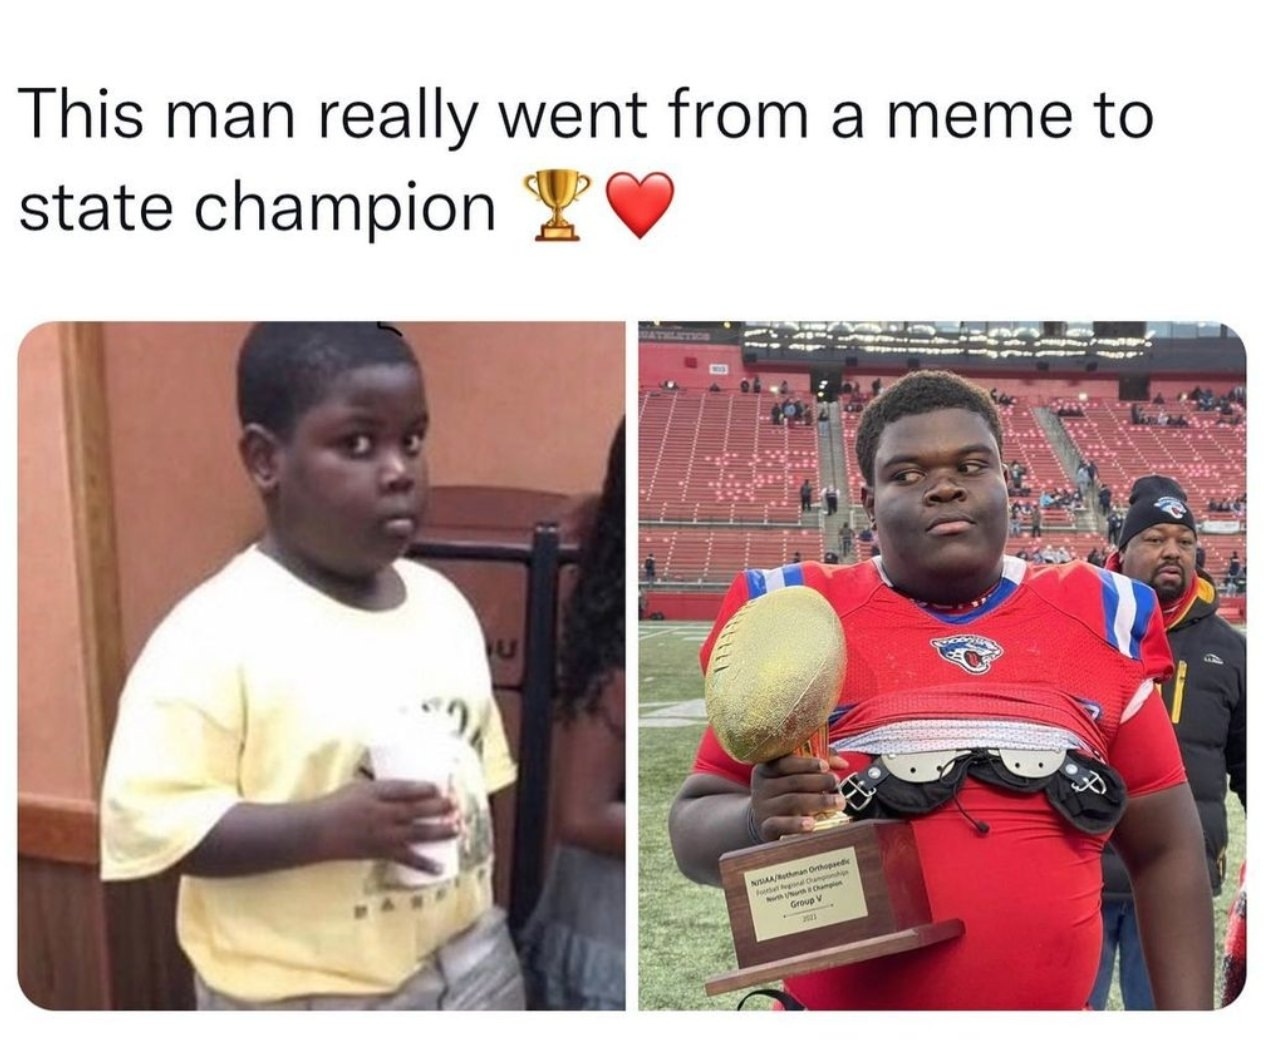 This man really went from a meme to state champion.